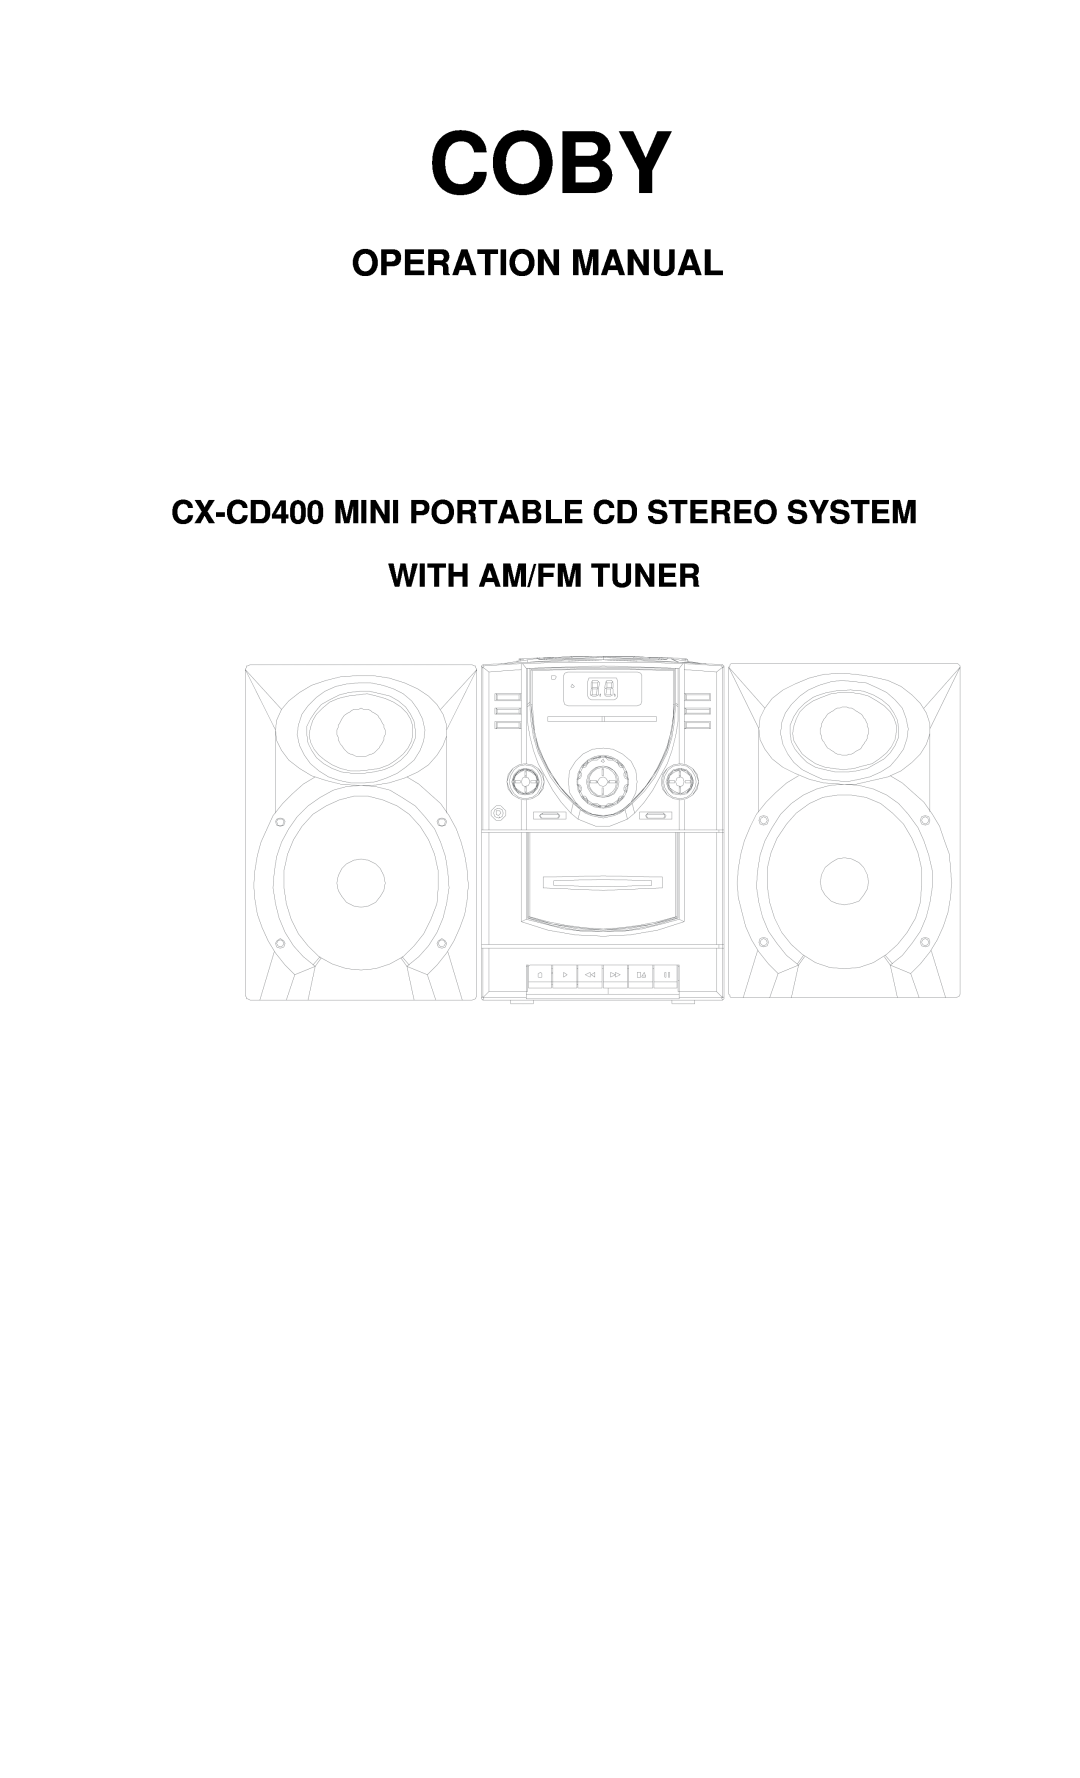 COBY electronic operation manual Coby, CX-CD400MINI PORTABLE CD STEREO SYSTEM, With Am/Fm Tuner 